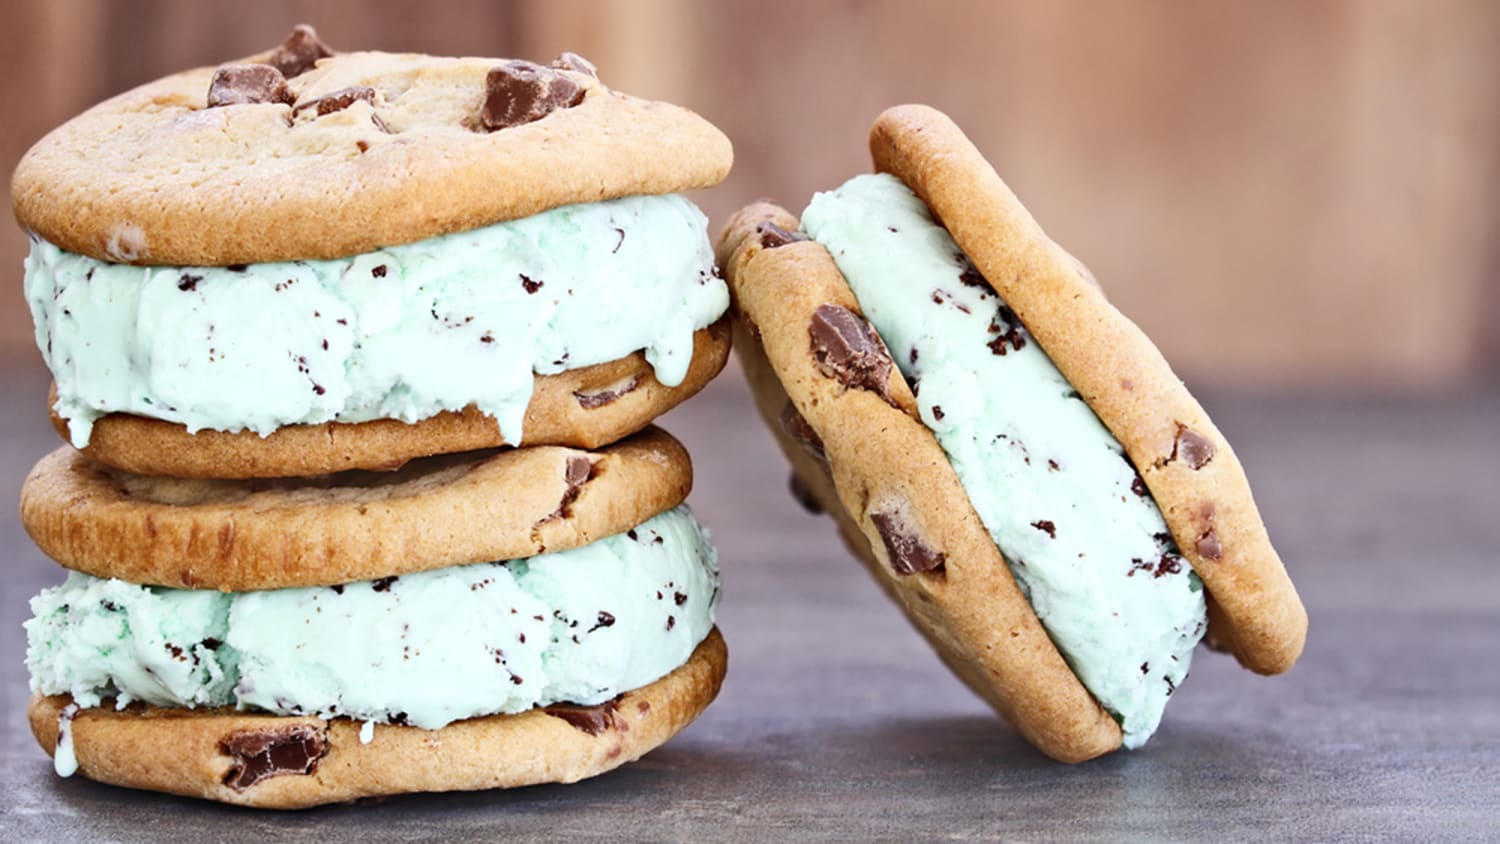 https://media-cldnry.s-nbcnews.com/image/upload/newscms/2016_31/1147807/mint-chip-ice-cream-sandwiches-tease-today-160802.jpg